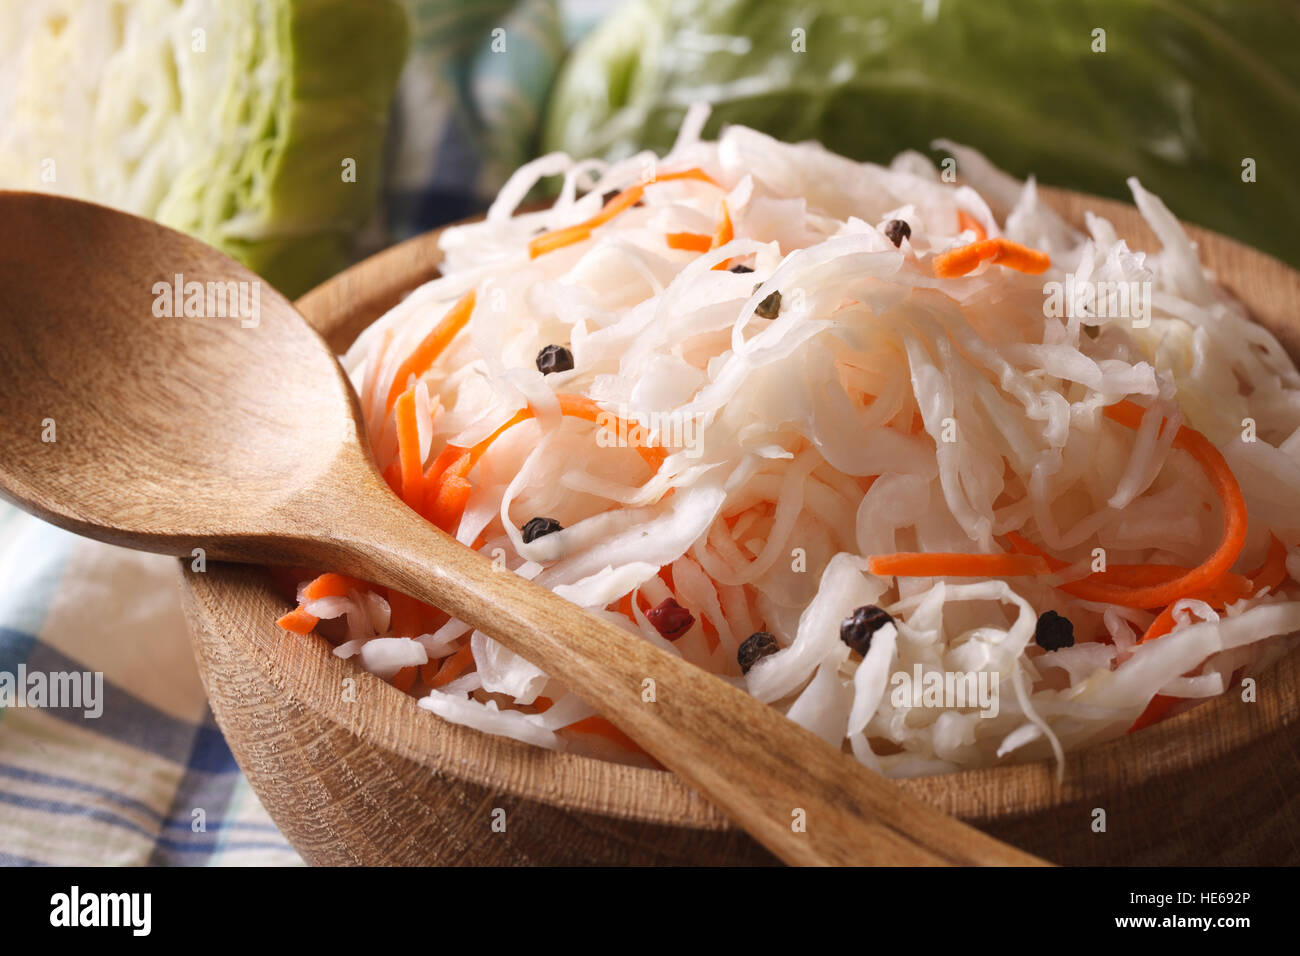 sauerkraut and carrots in a wooden plate macro horizontal, rustic style Stock Photo